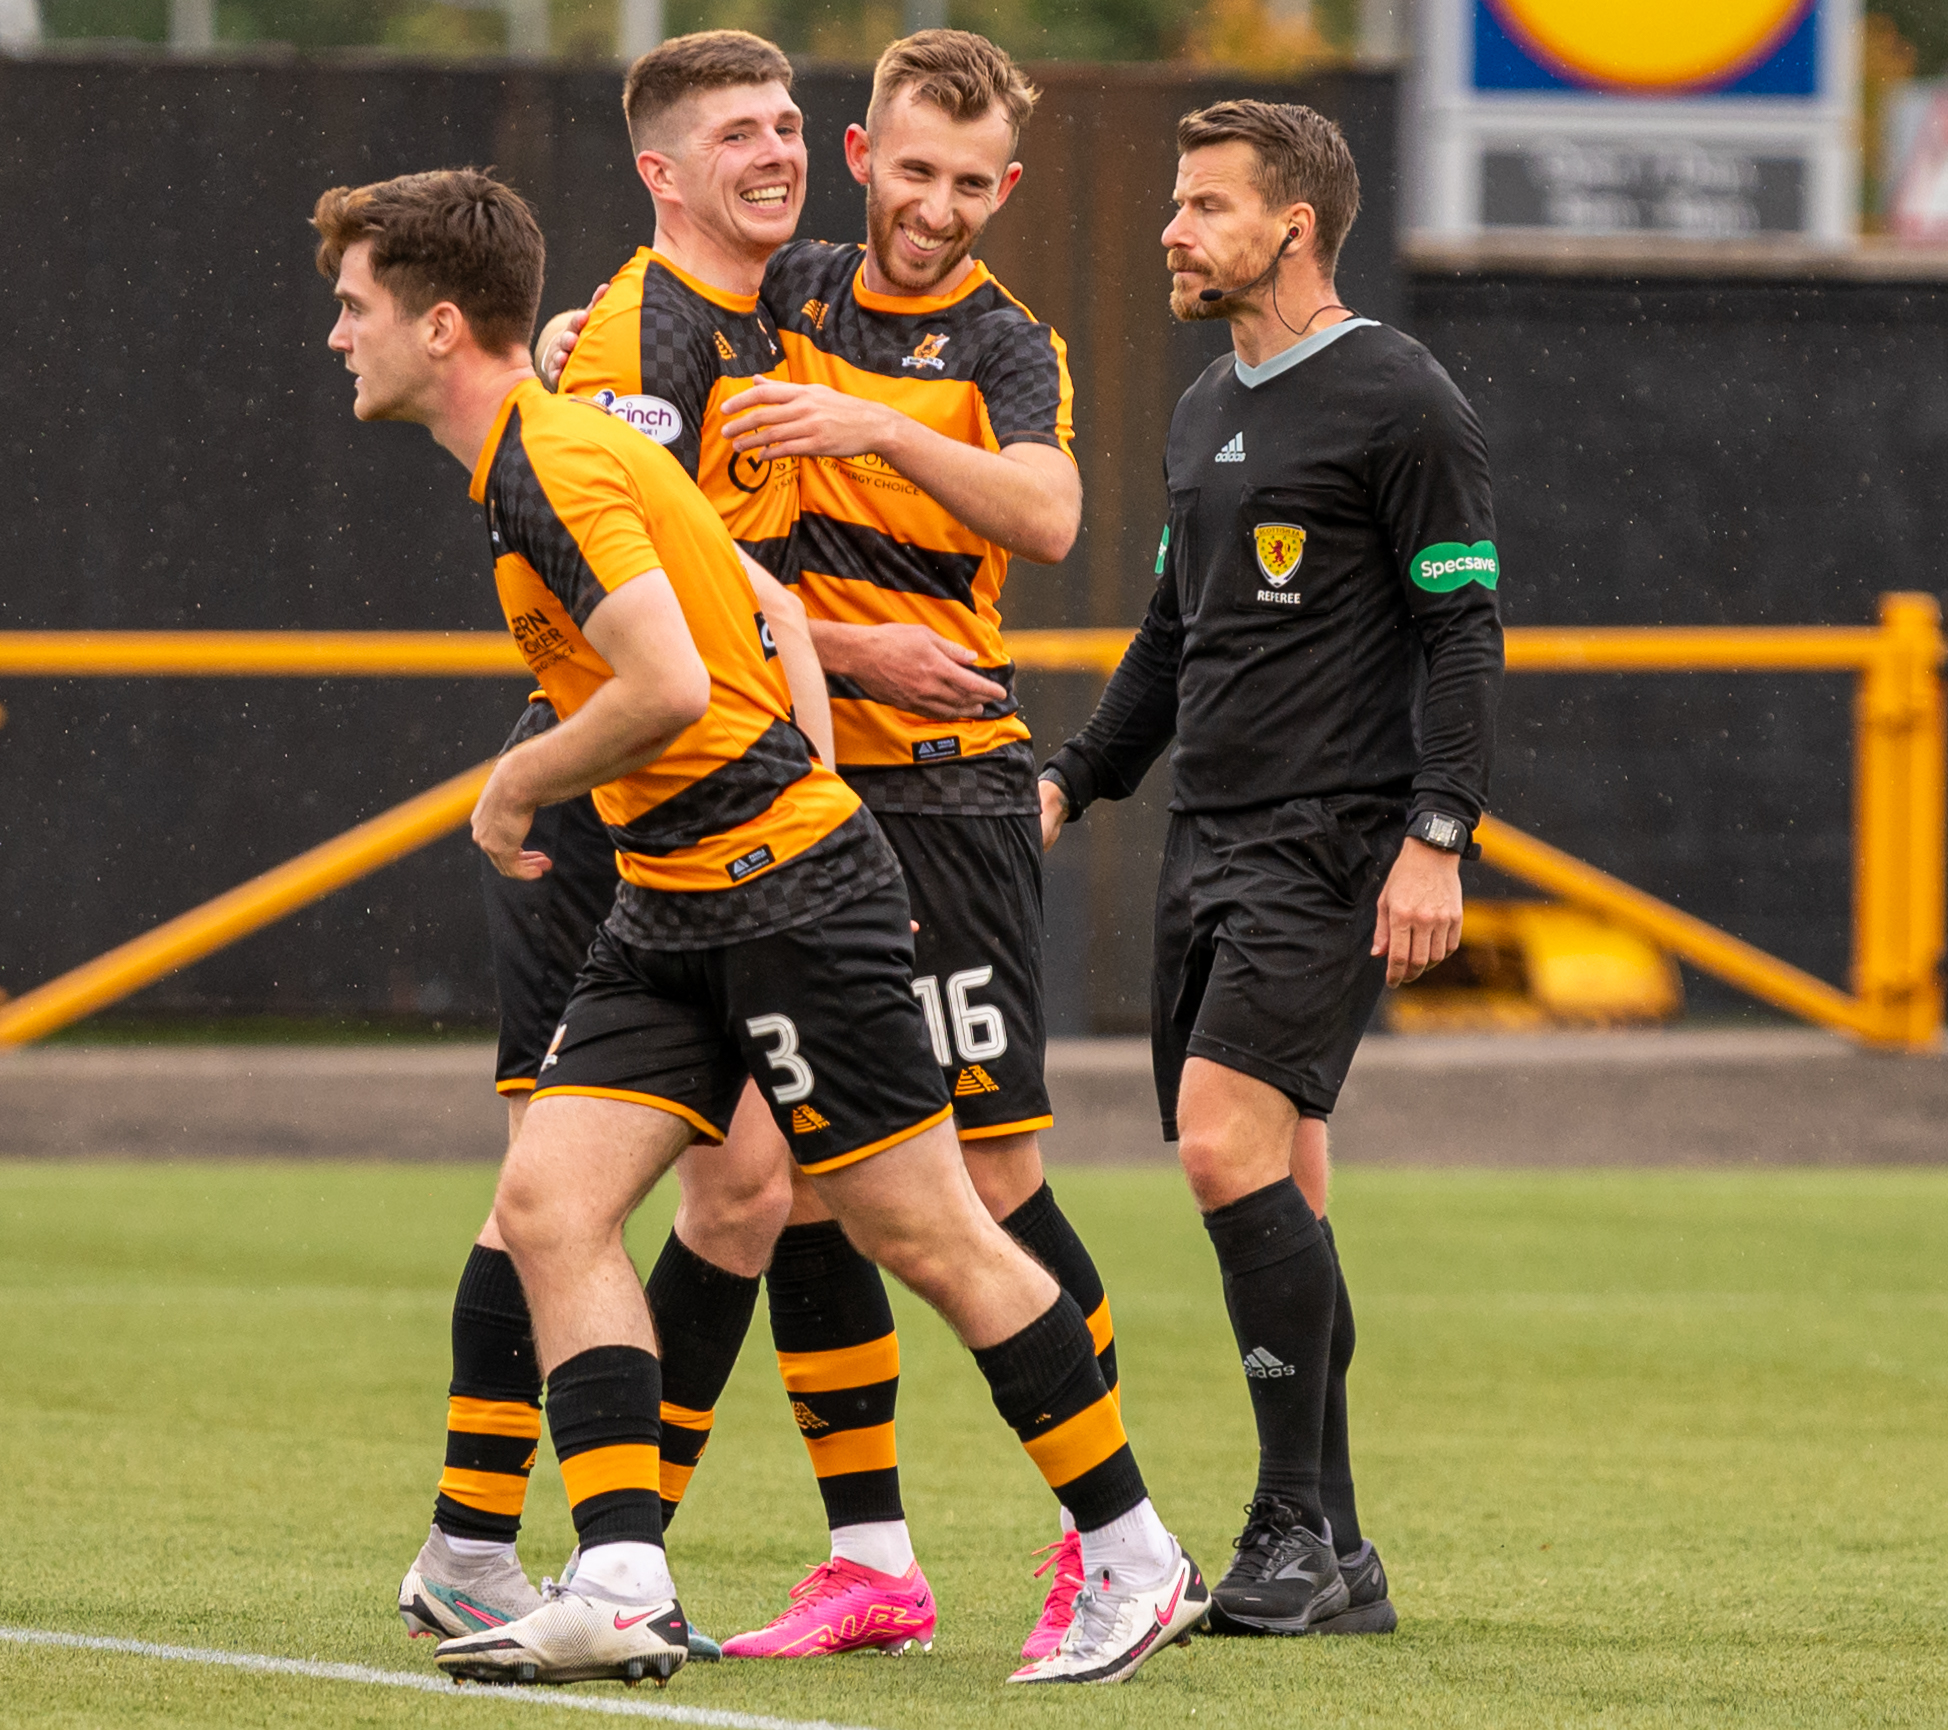 Alistair Roy scores goal on debut for Alloa Athletic